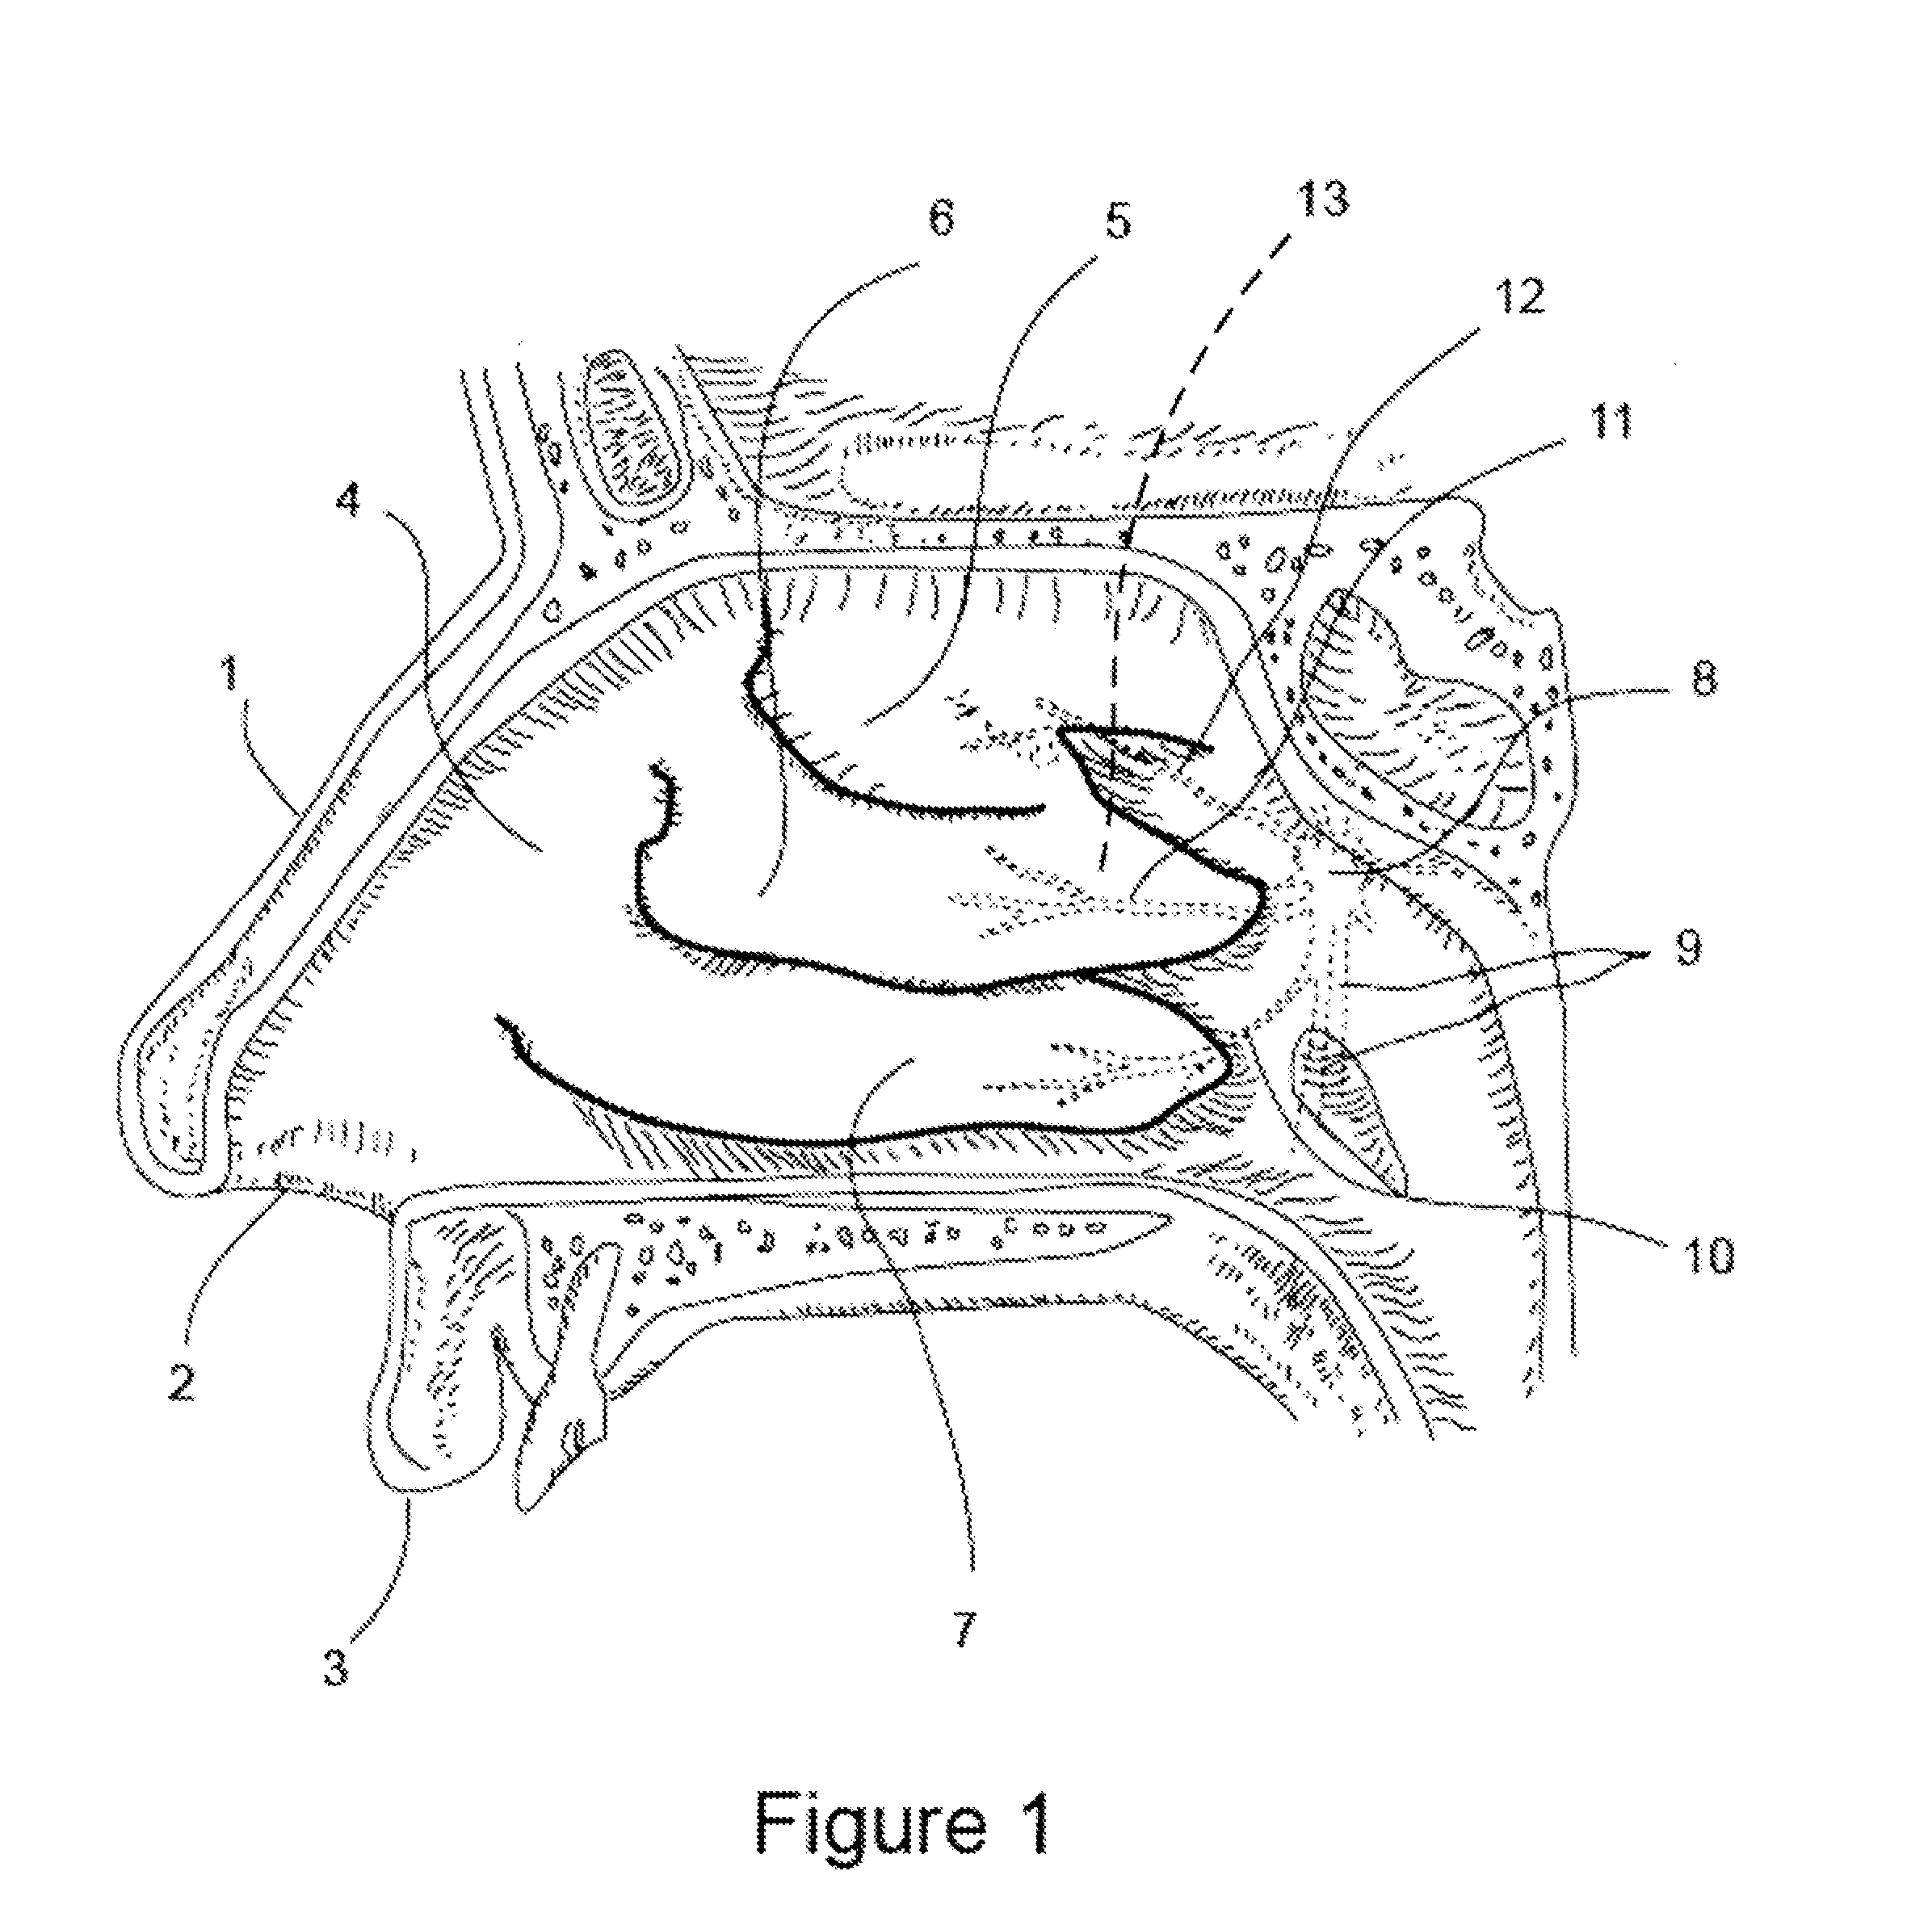 Apparatus and methods for treating rhinitis